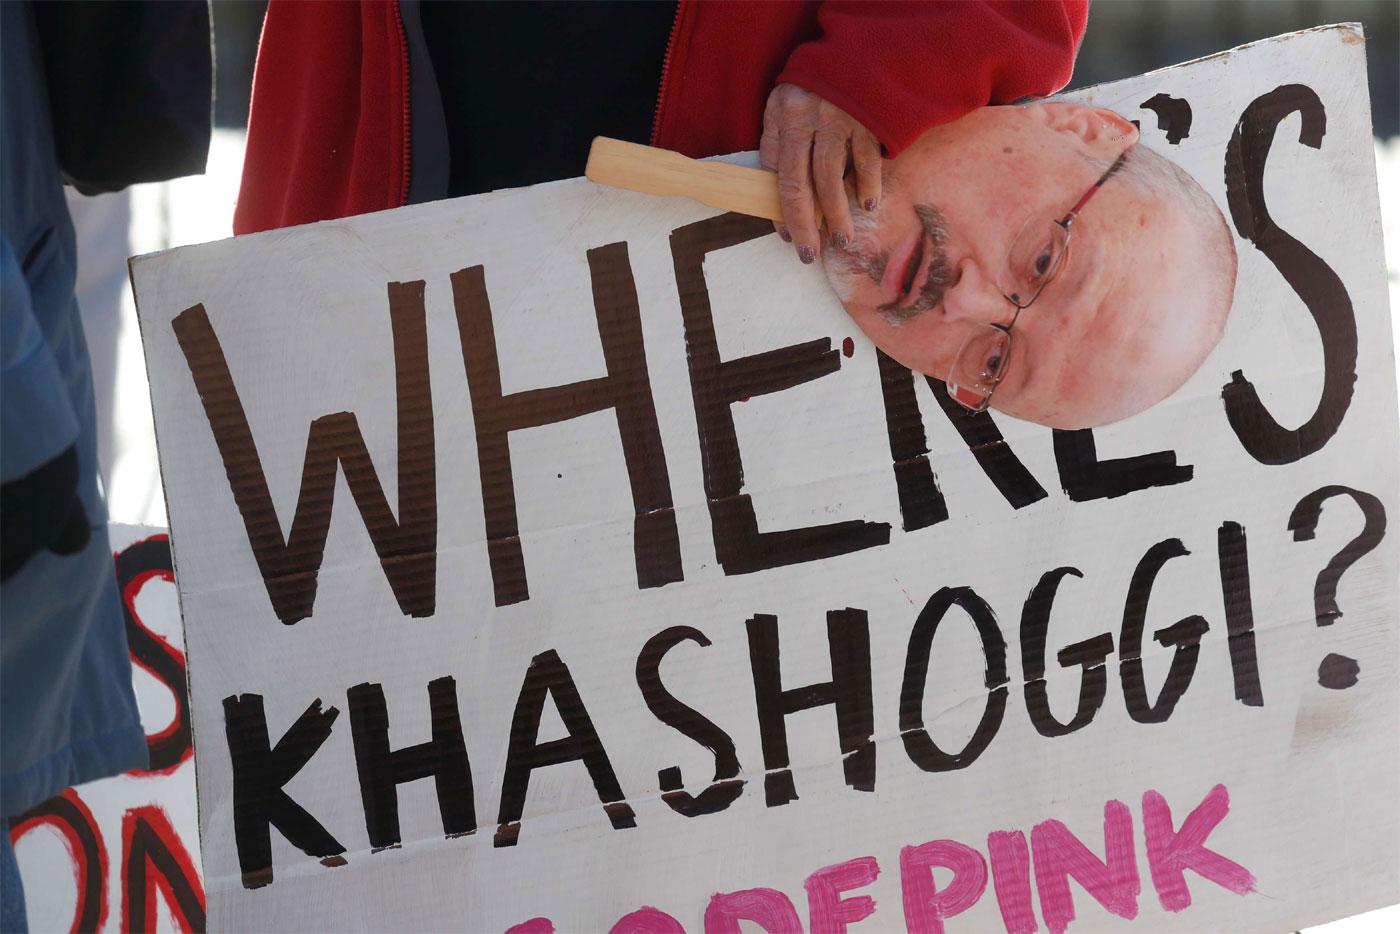 An activist holds a sign and image of missing Saudi journalist Jamal Khashoggi during a demonstration in Washington